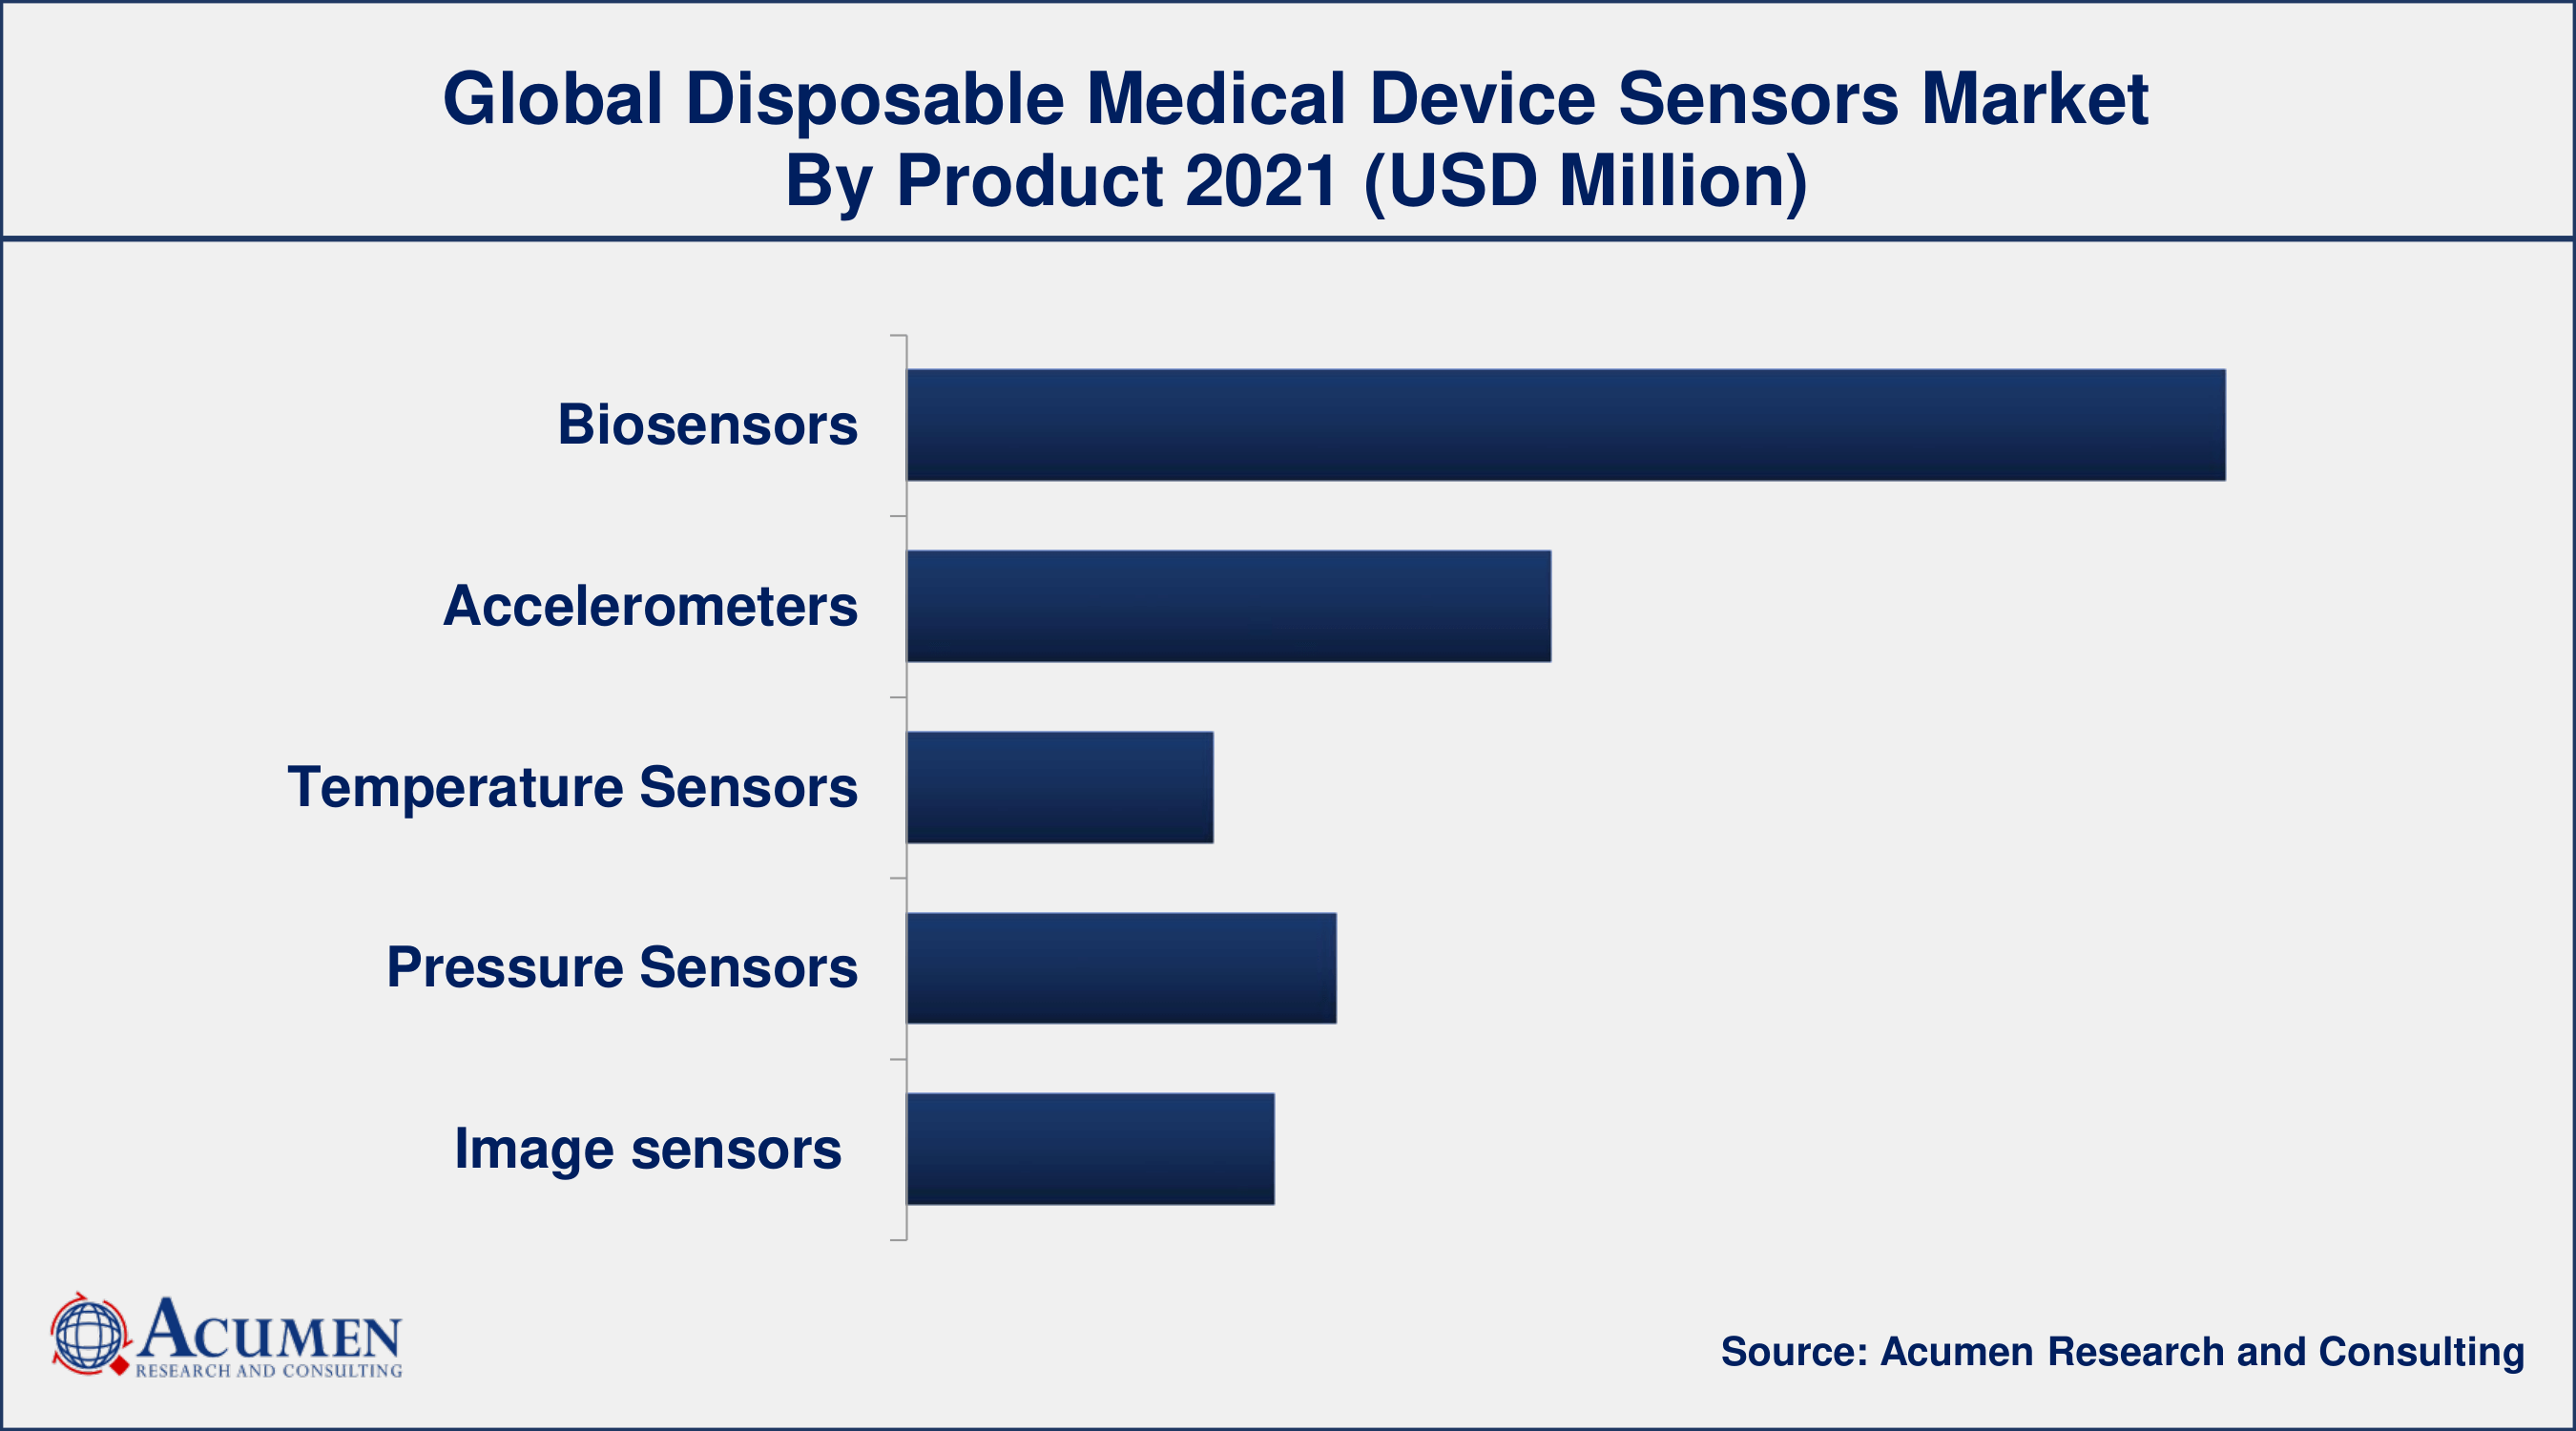 By Product, the biosensors segment has accounted market share of over 42.7% in 2021